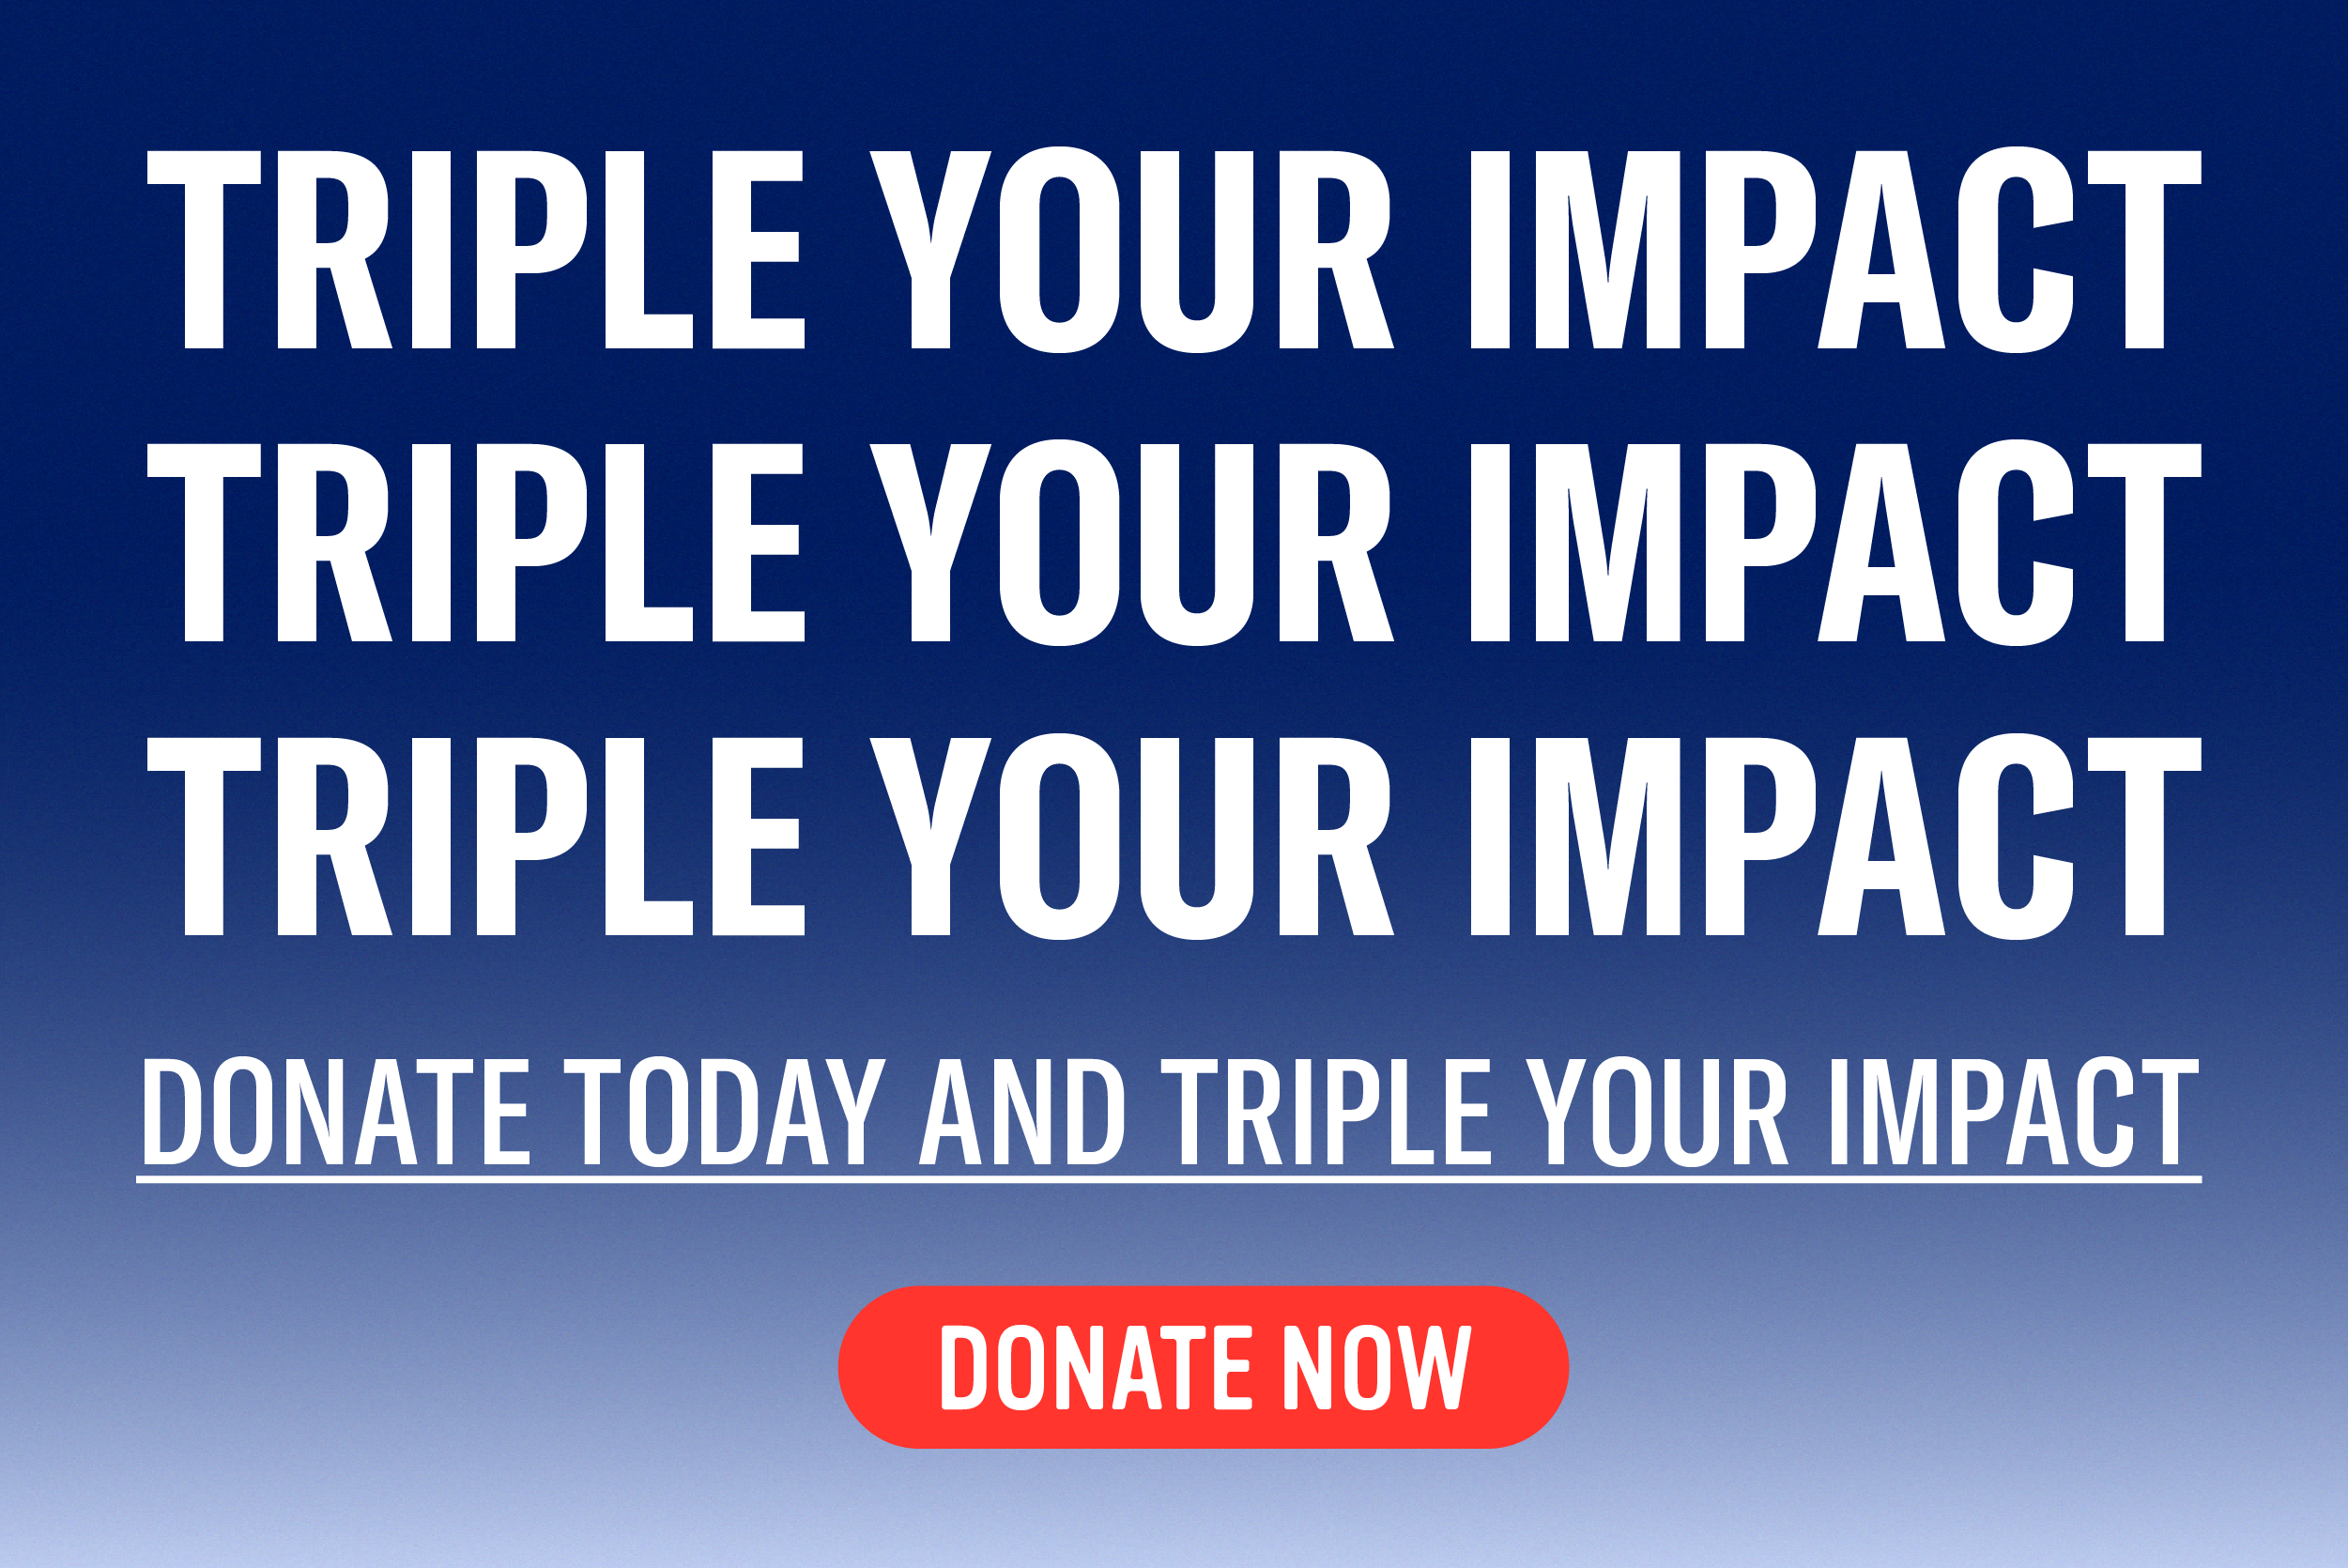 Donate today and triple your impact.